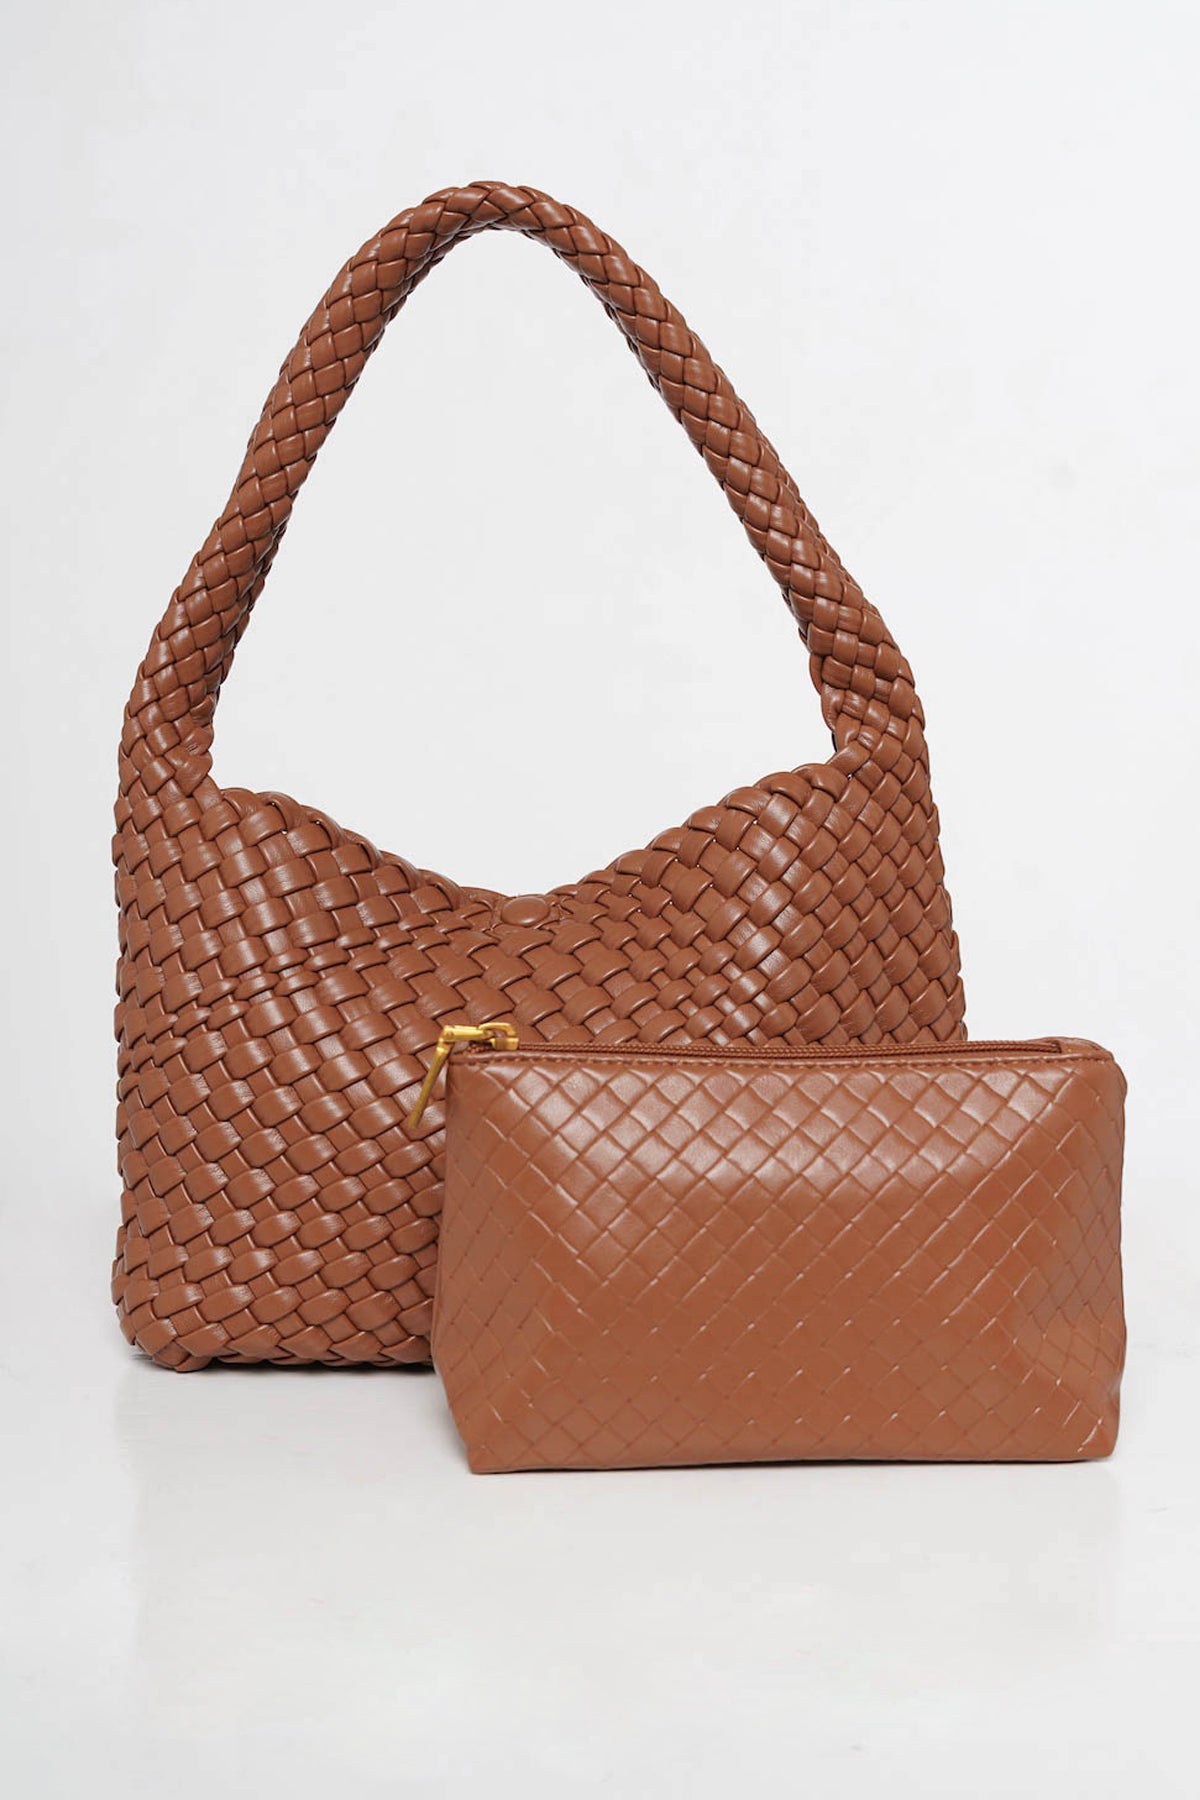 Adette Tote In Brown (4 LEFT)